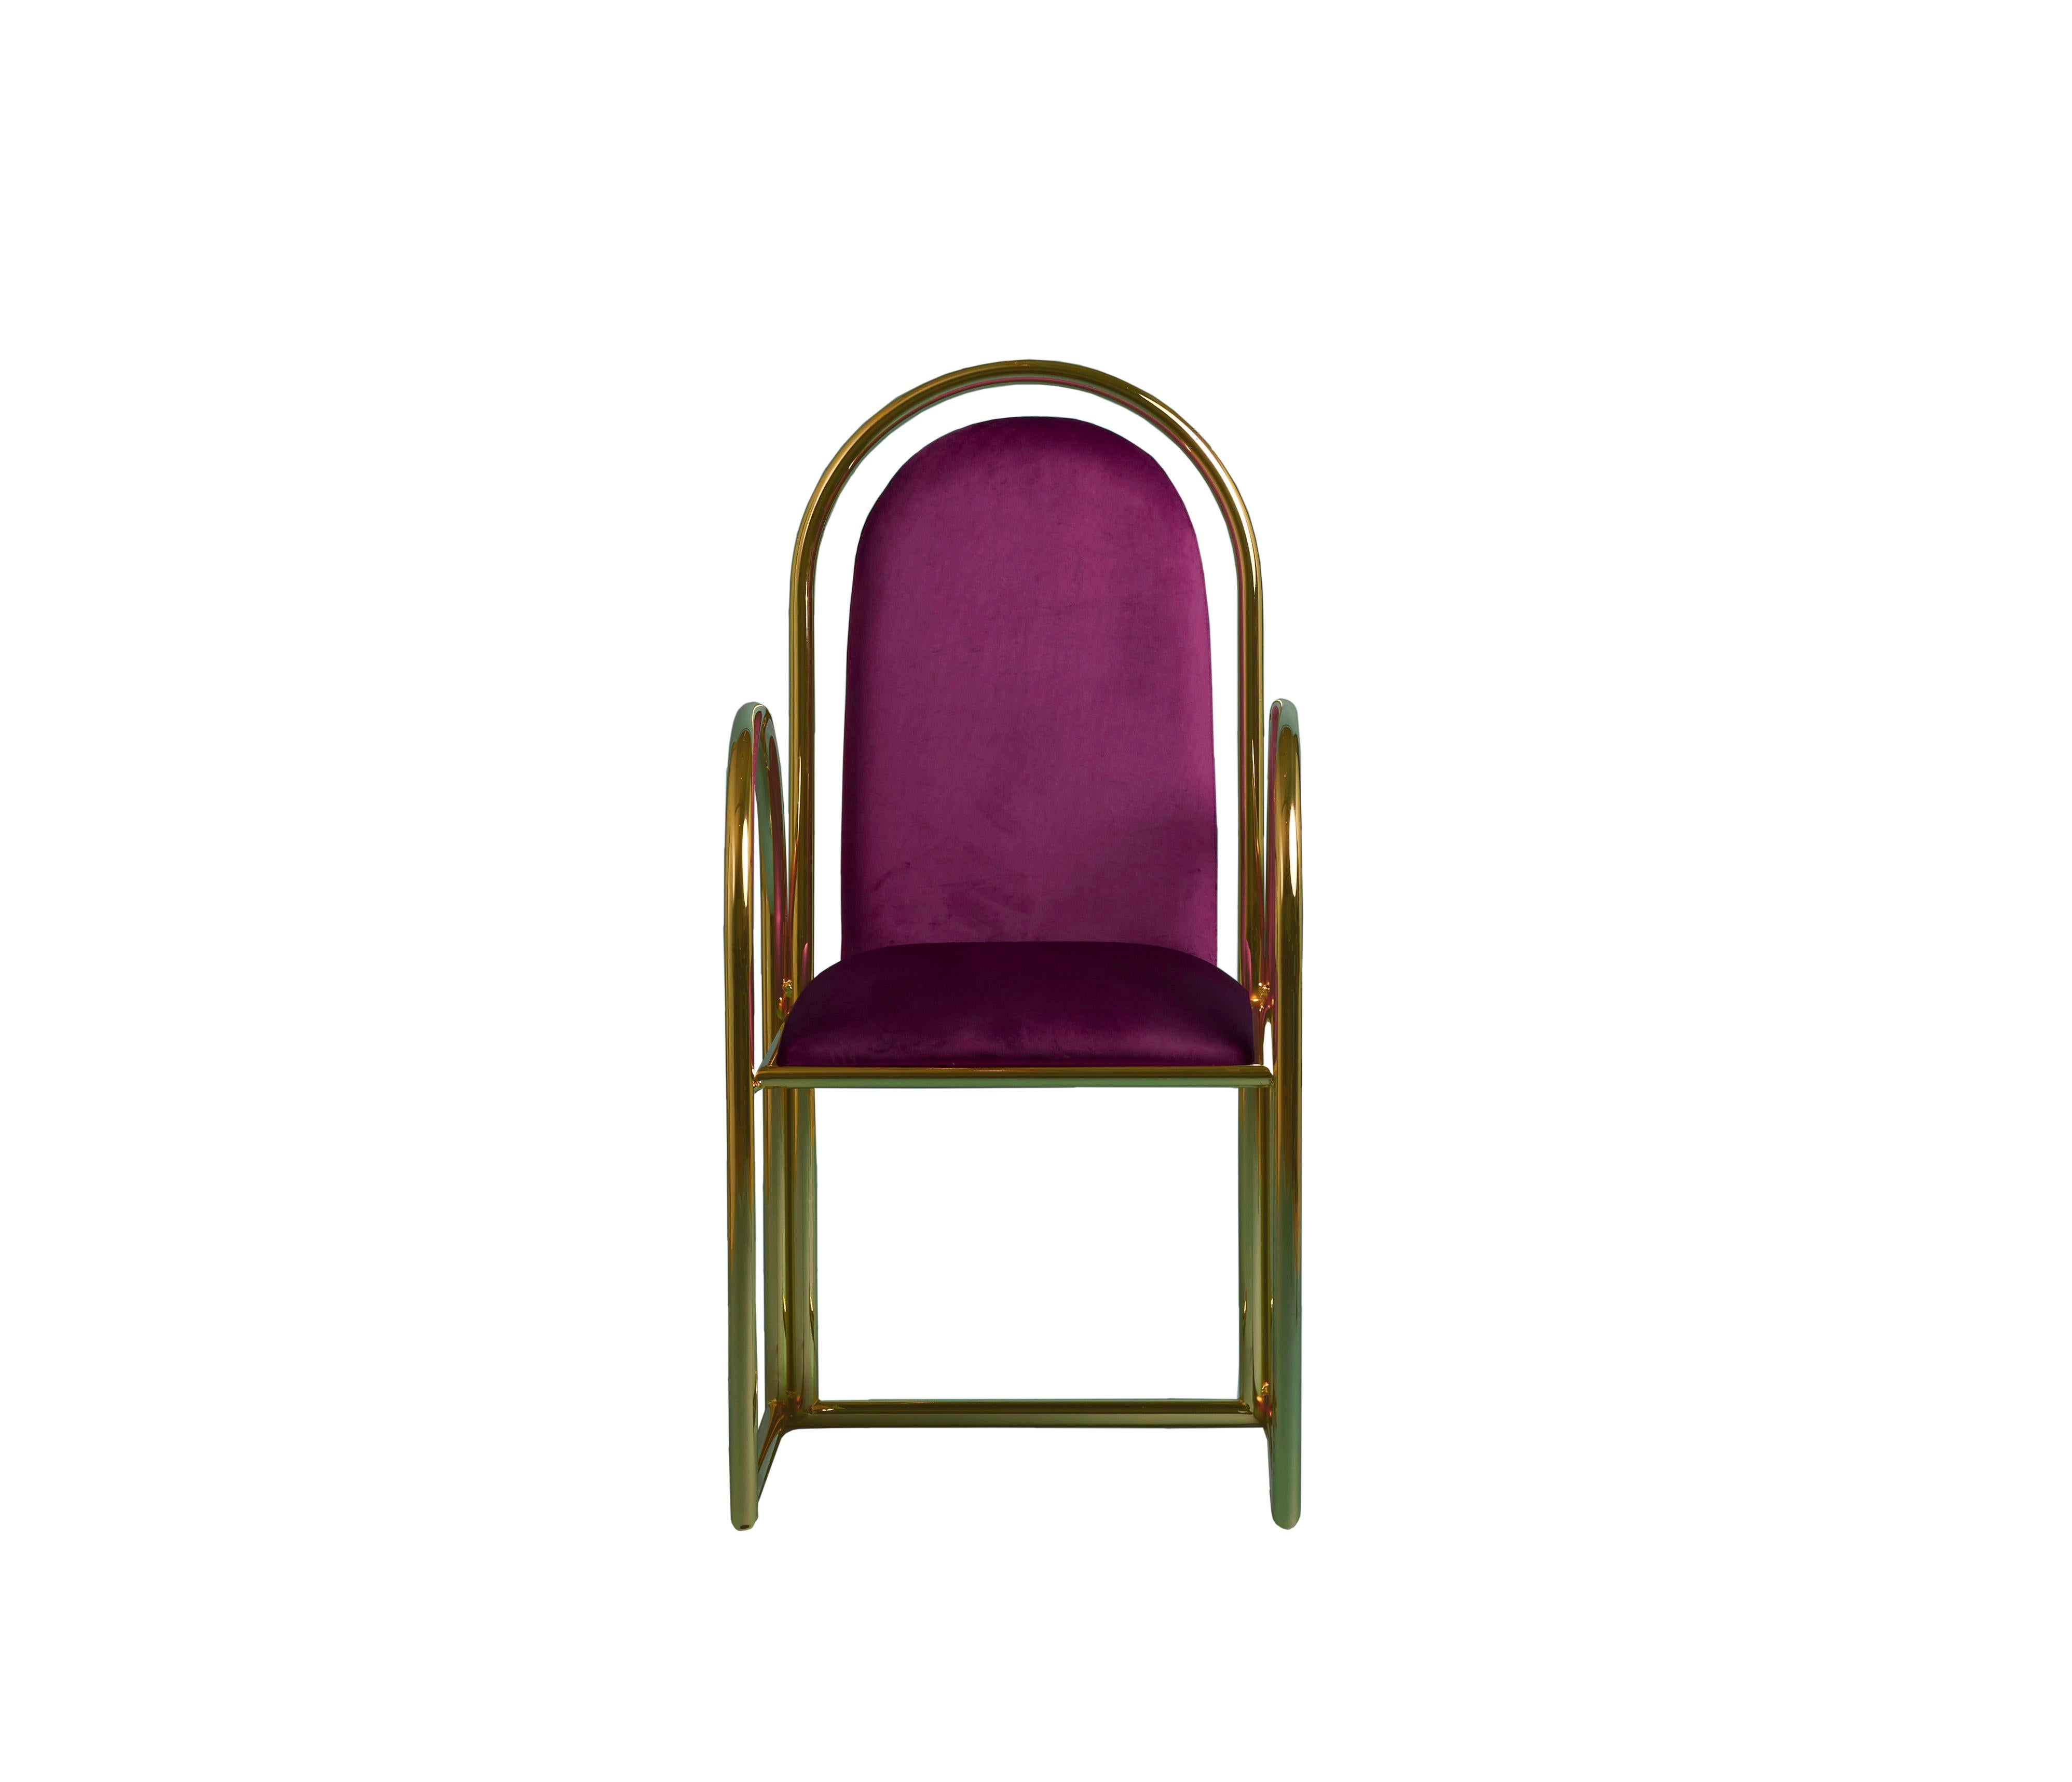 Modern Set of 4 Arco Chairs by Houtique